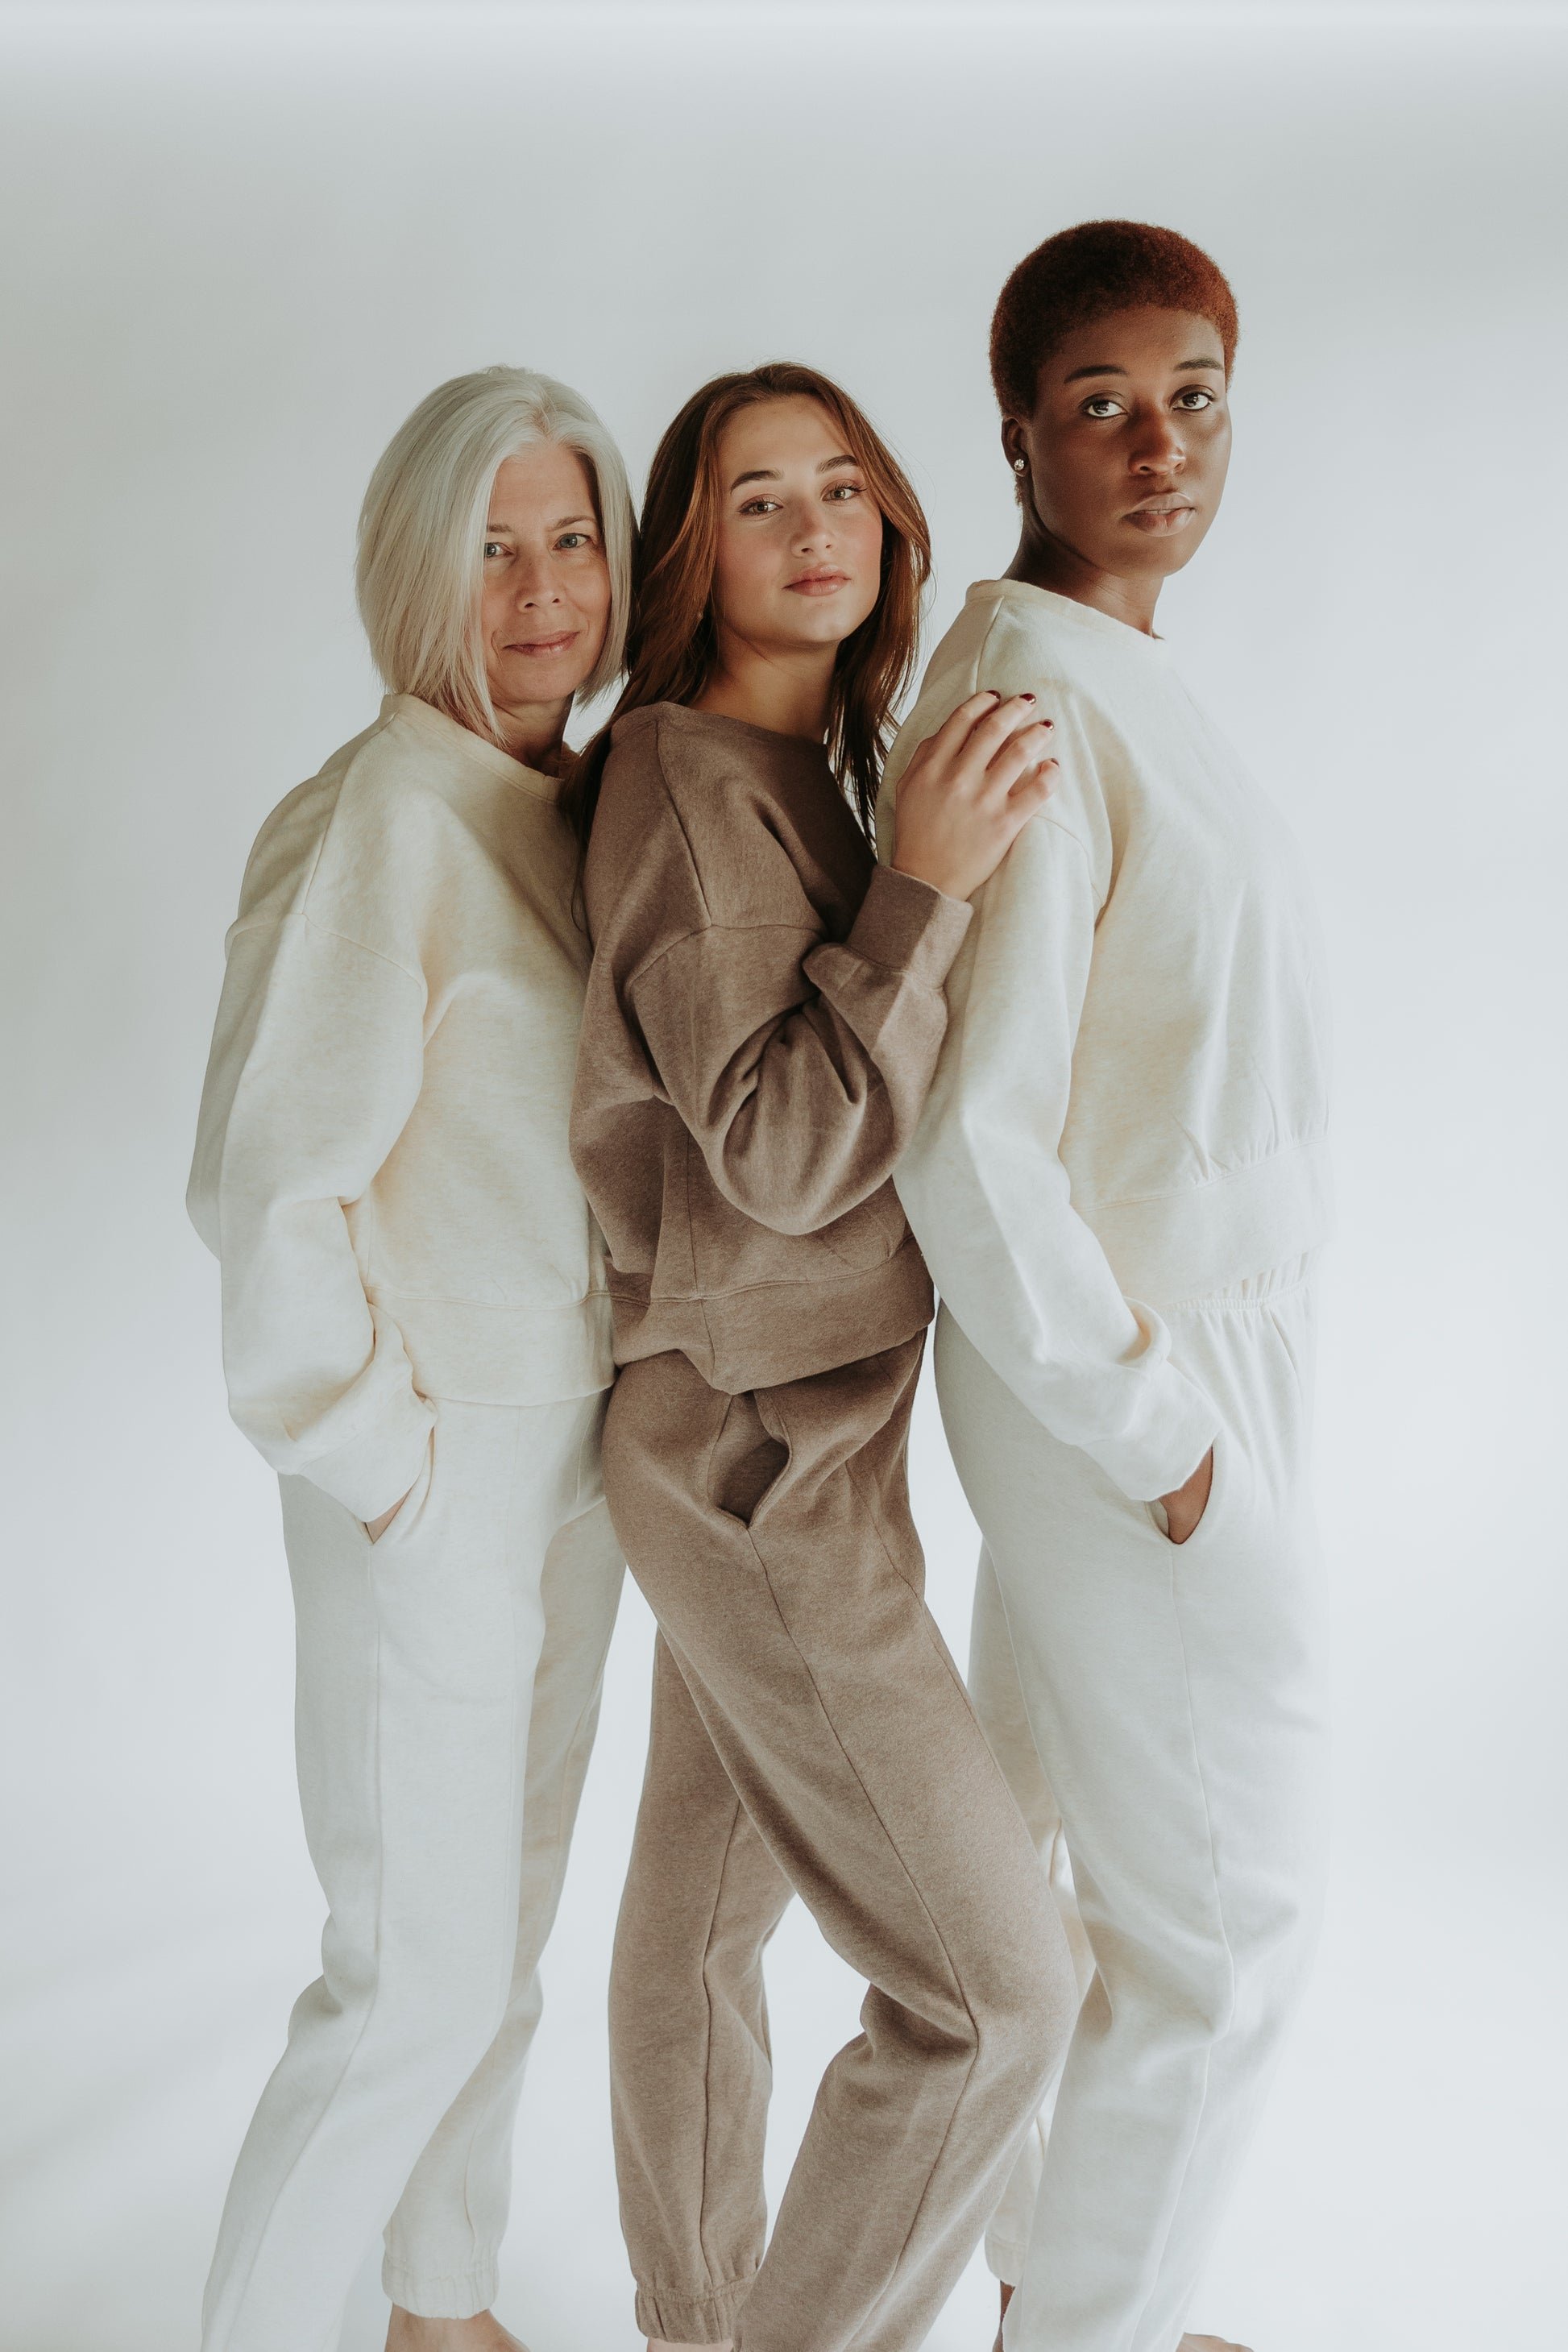 Three women are smiling at the camera, standing, and wearing the classic flee set in two different colors : beige and chocolate brown